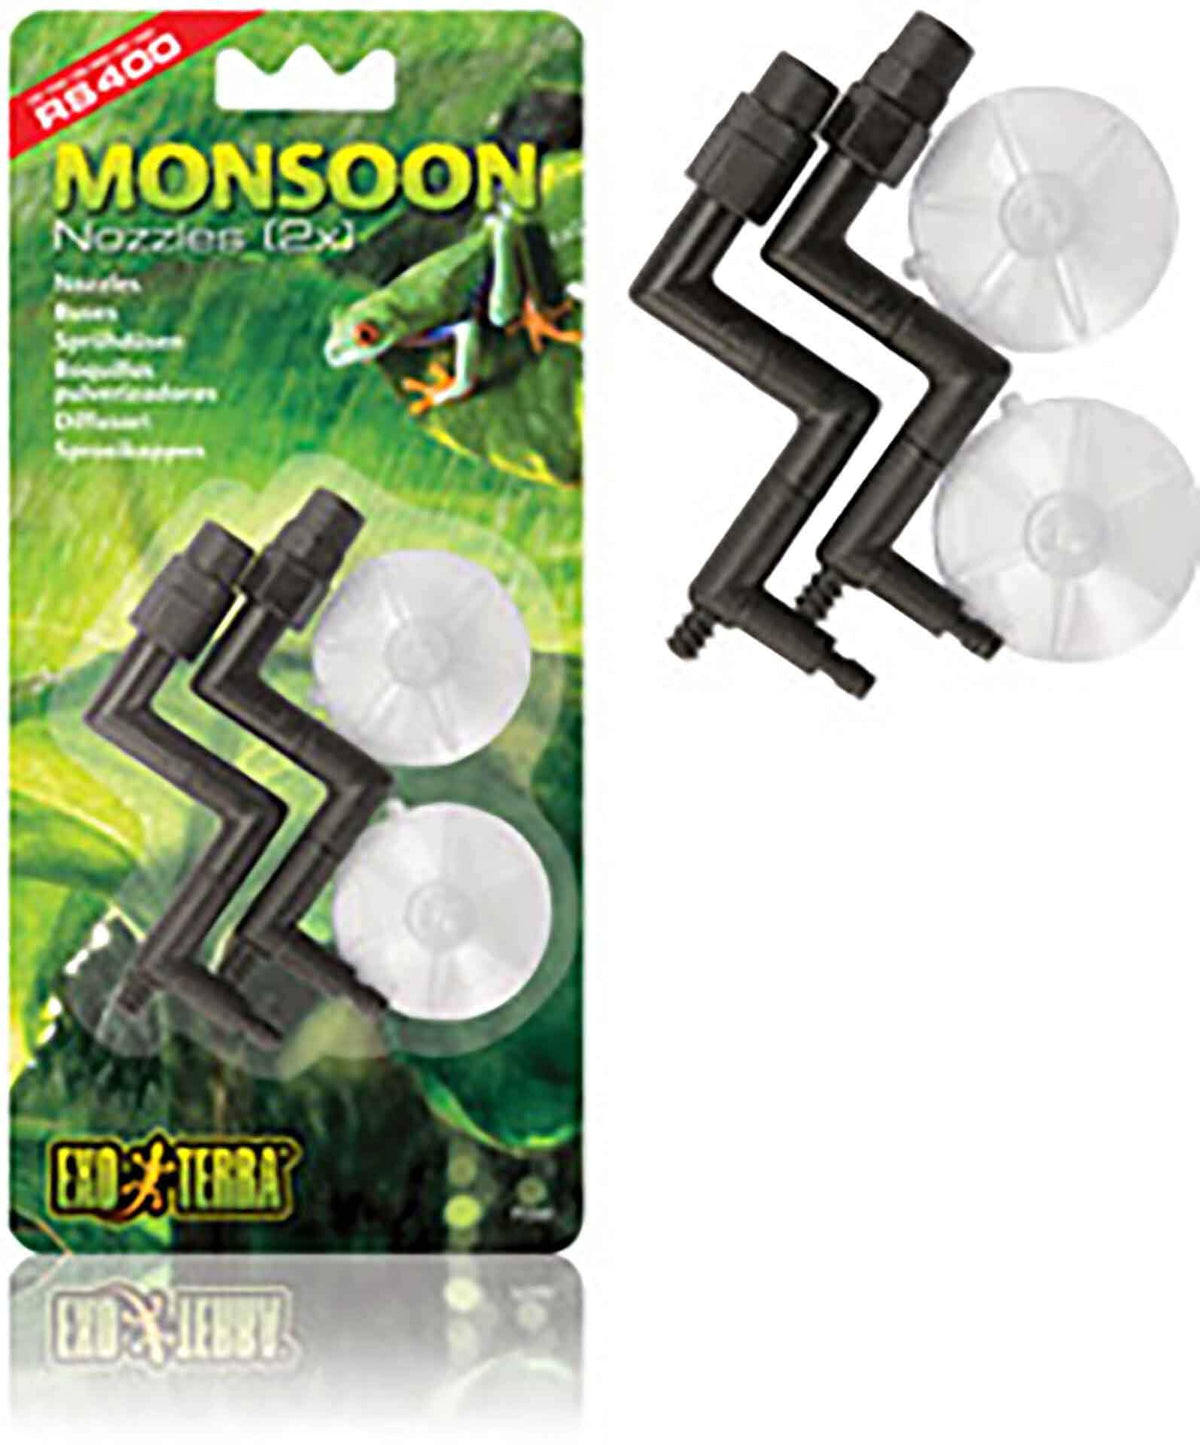 Exo Terra Monsoon Reptile Mister Replacement Nozzles with Suction Cups